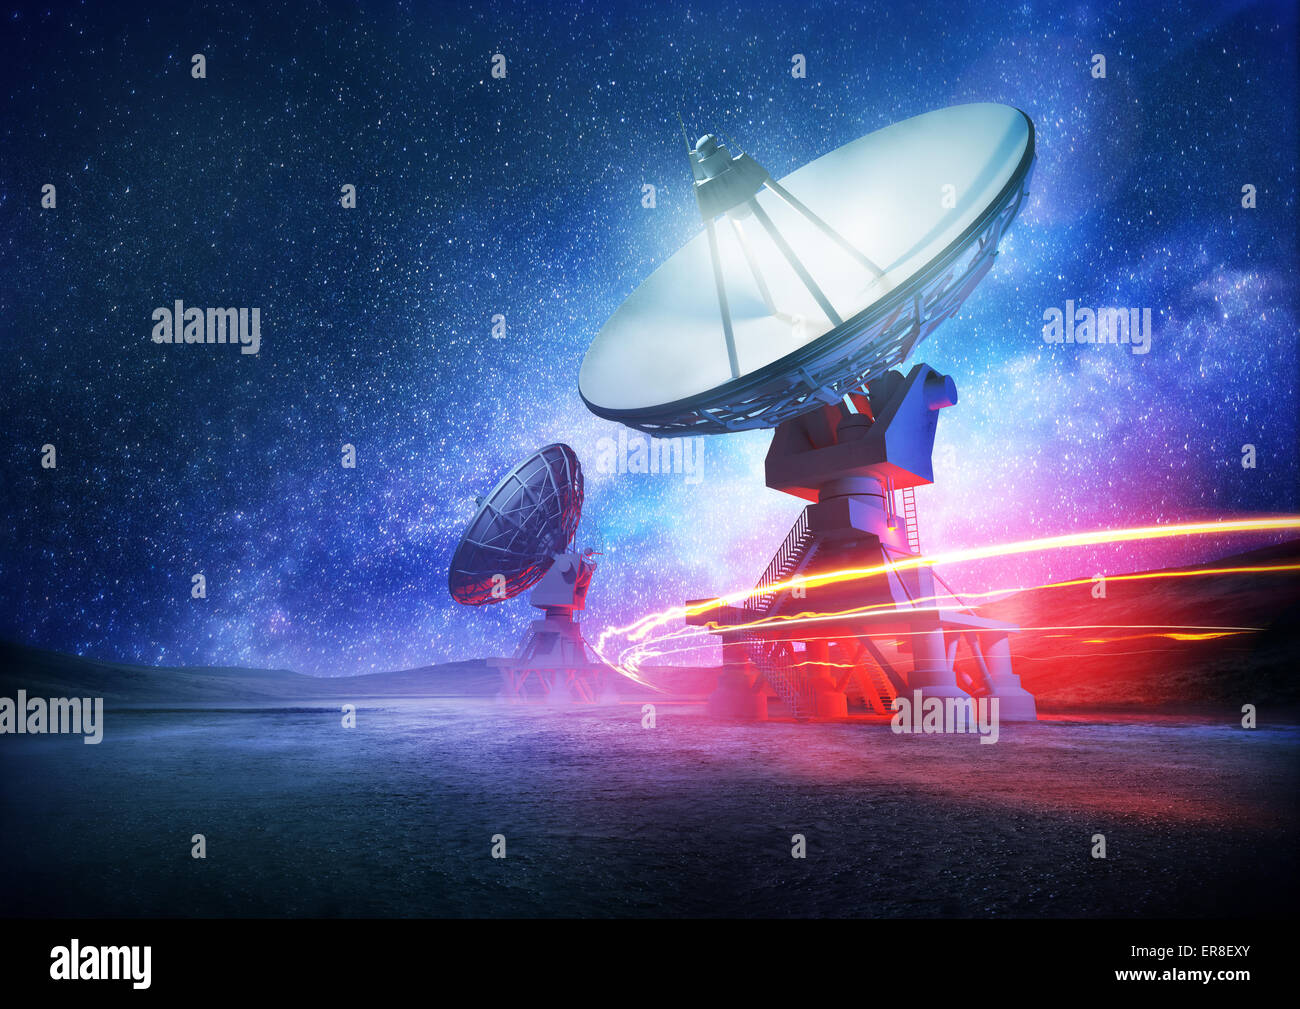 Astronomy deep space radio telescope arrays at night pointing into space. The milky way sets the background. Illustration. Stock Photo